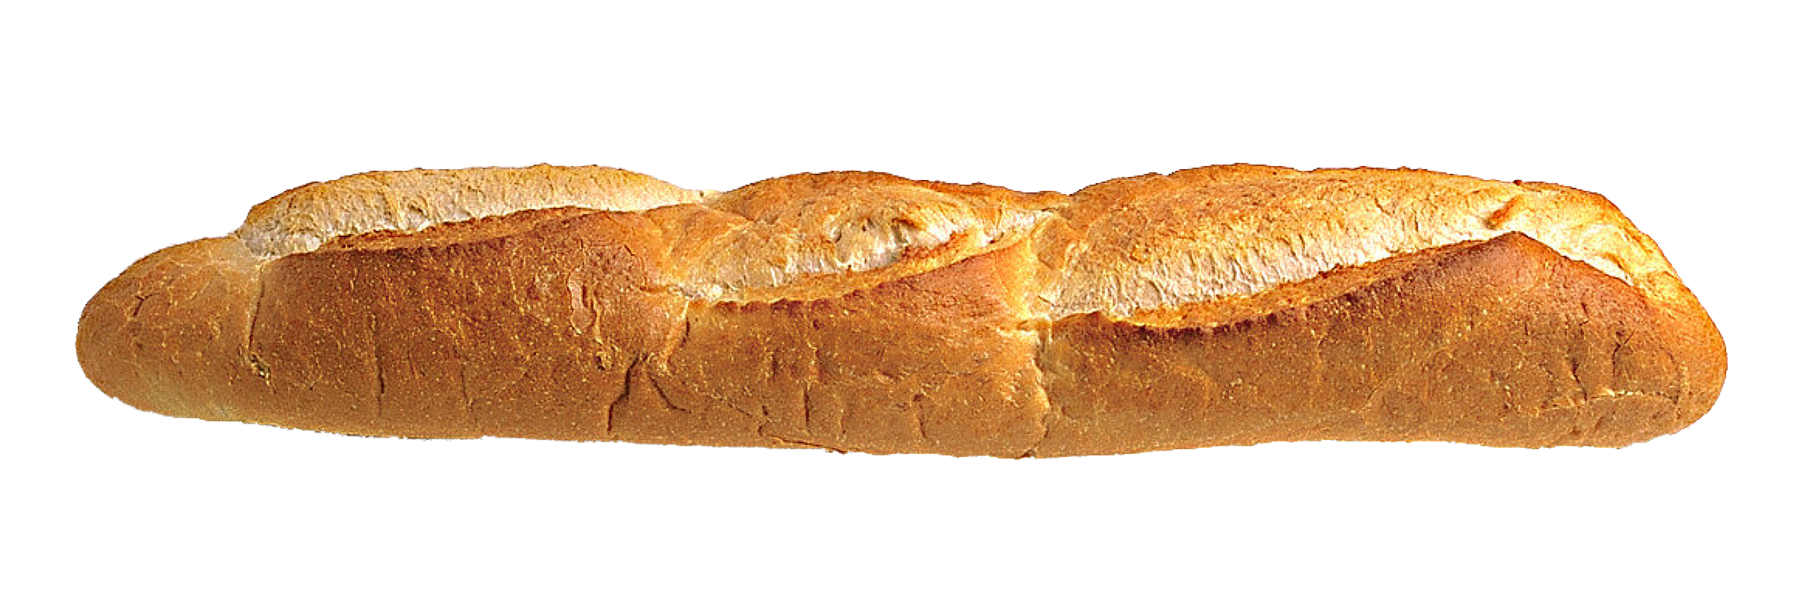 A Loaf Of Bread On A Black Background